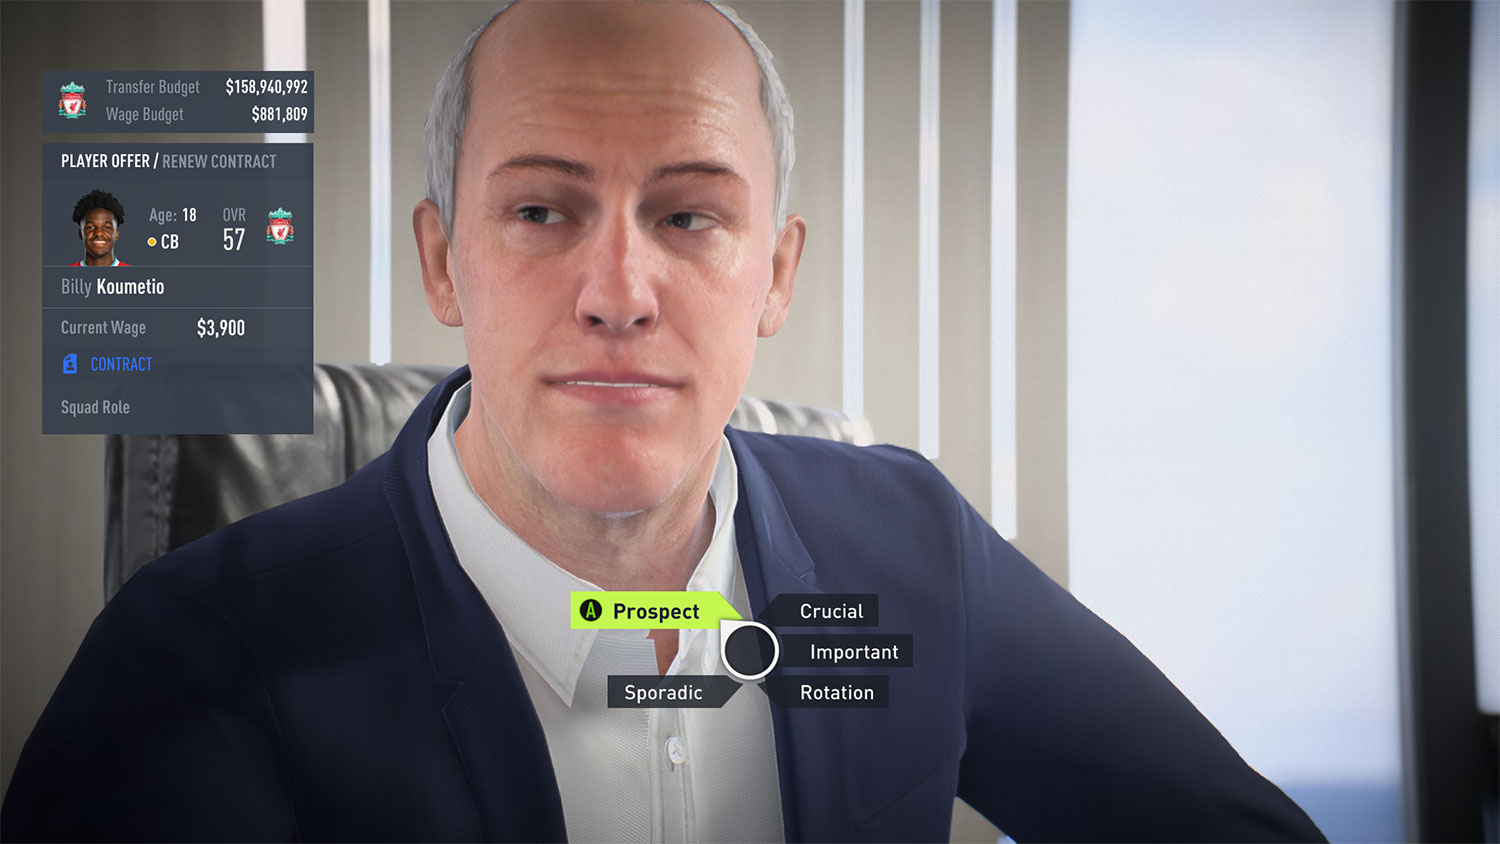 A manager conducting a transfer negotiation in FIFA 22.